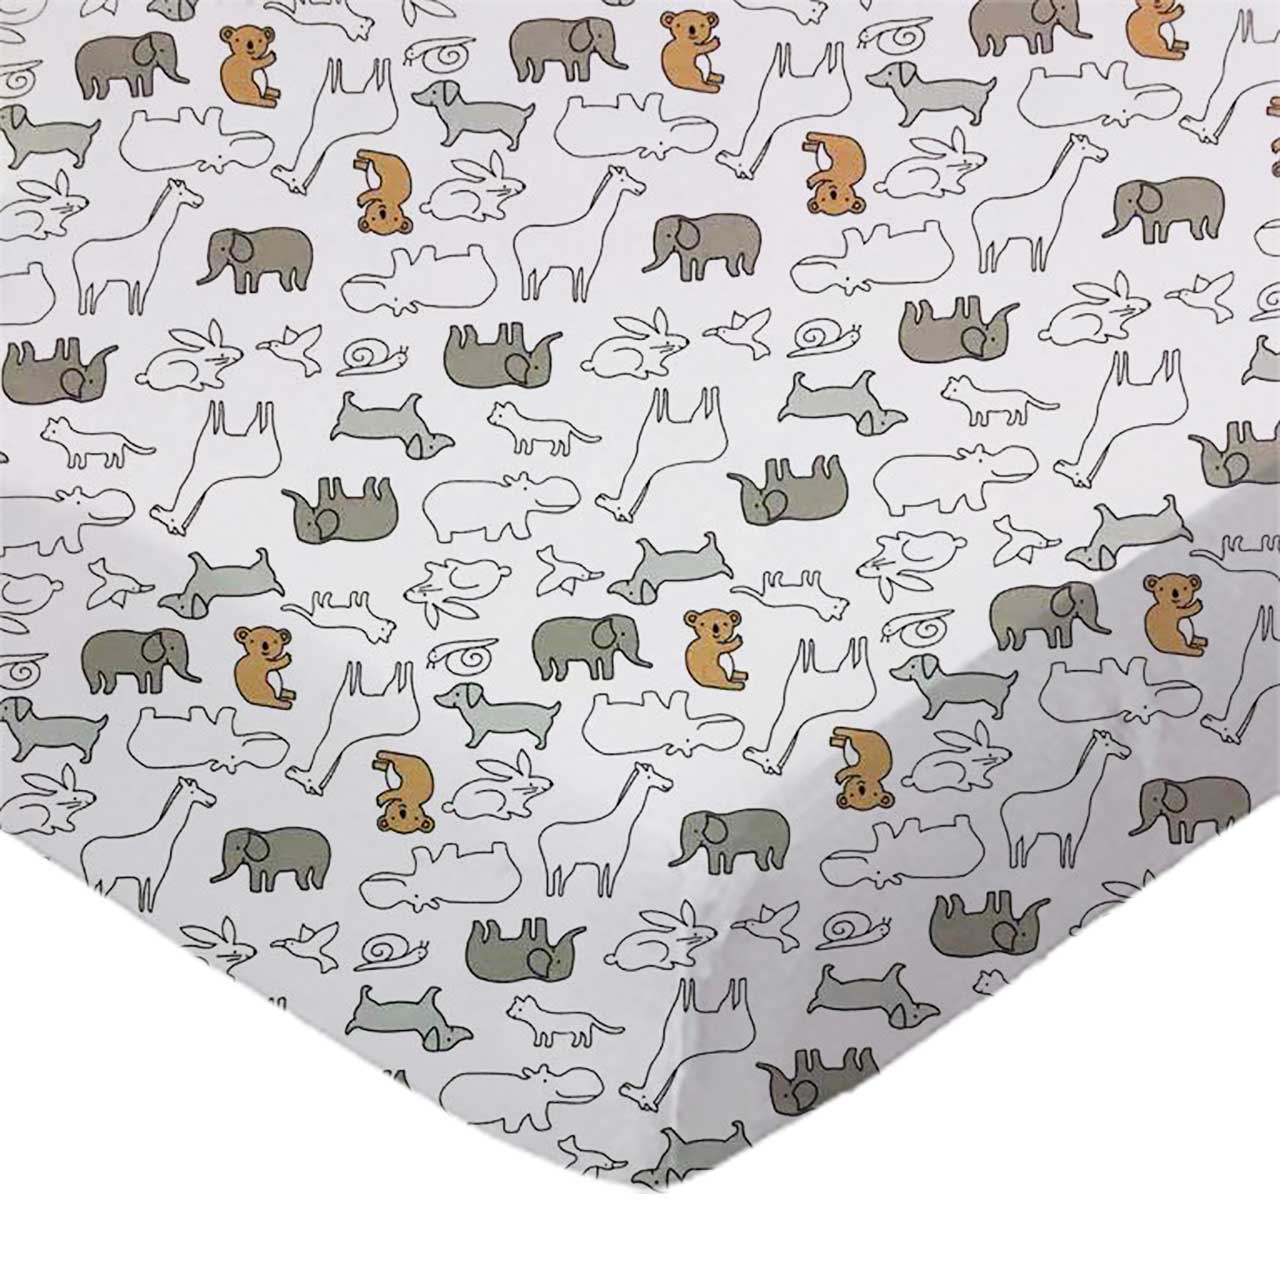 SheetWorld Fitted Crib Sheet - 100% Cotton Jersey - Baby Animals, Made